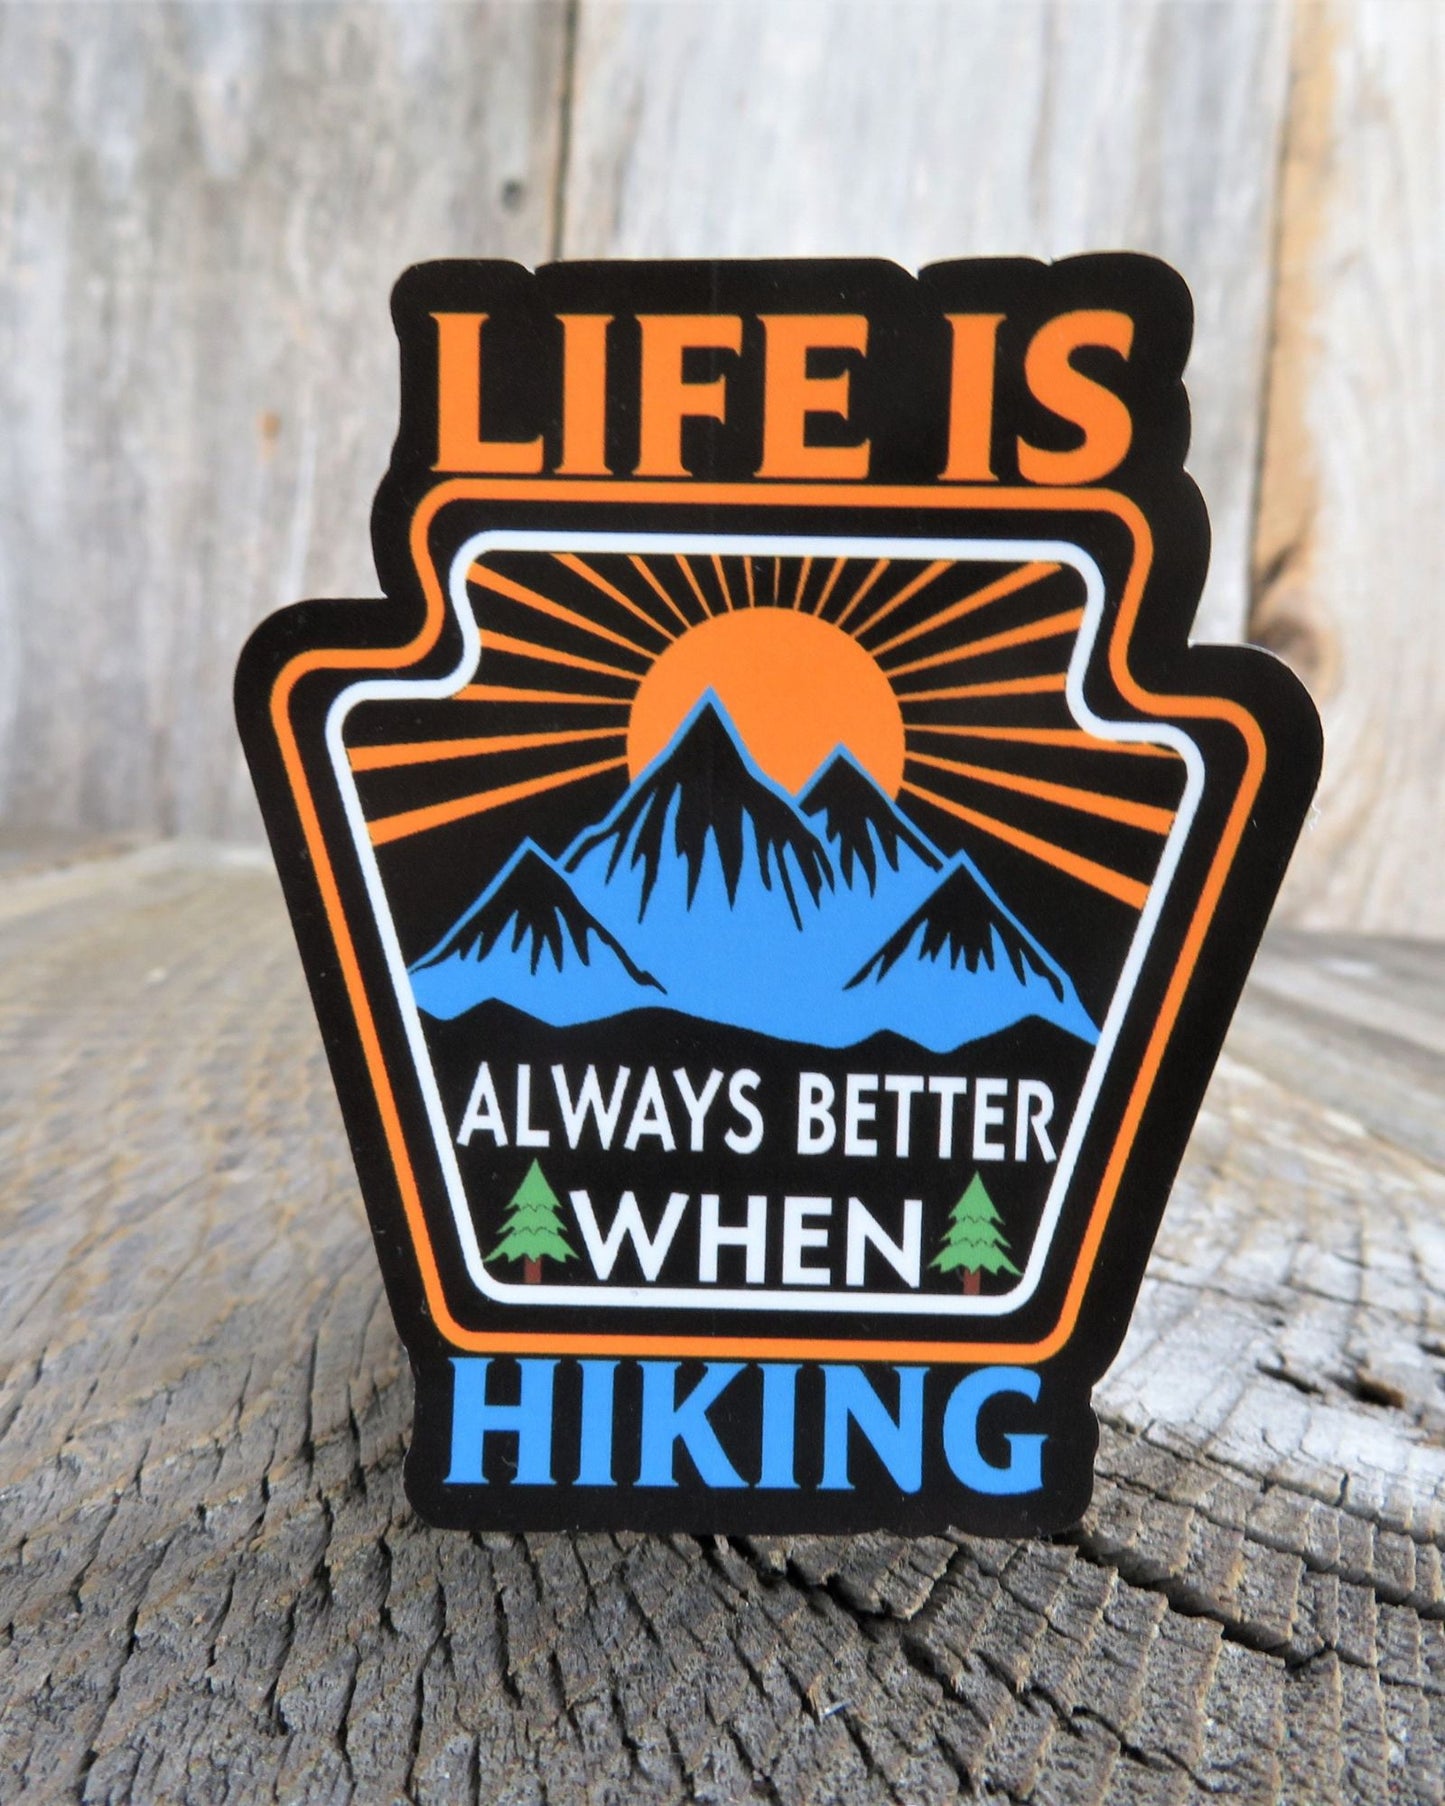 Hiking Sticker Life is Better When Hiking Decal Emblem Full Color Waterproof Car Water Bottle Laptop